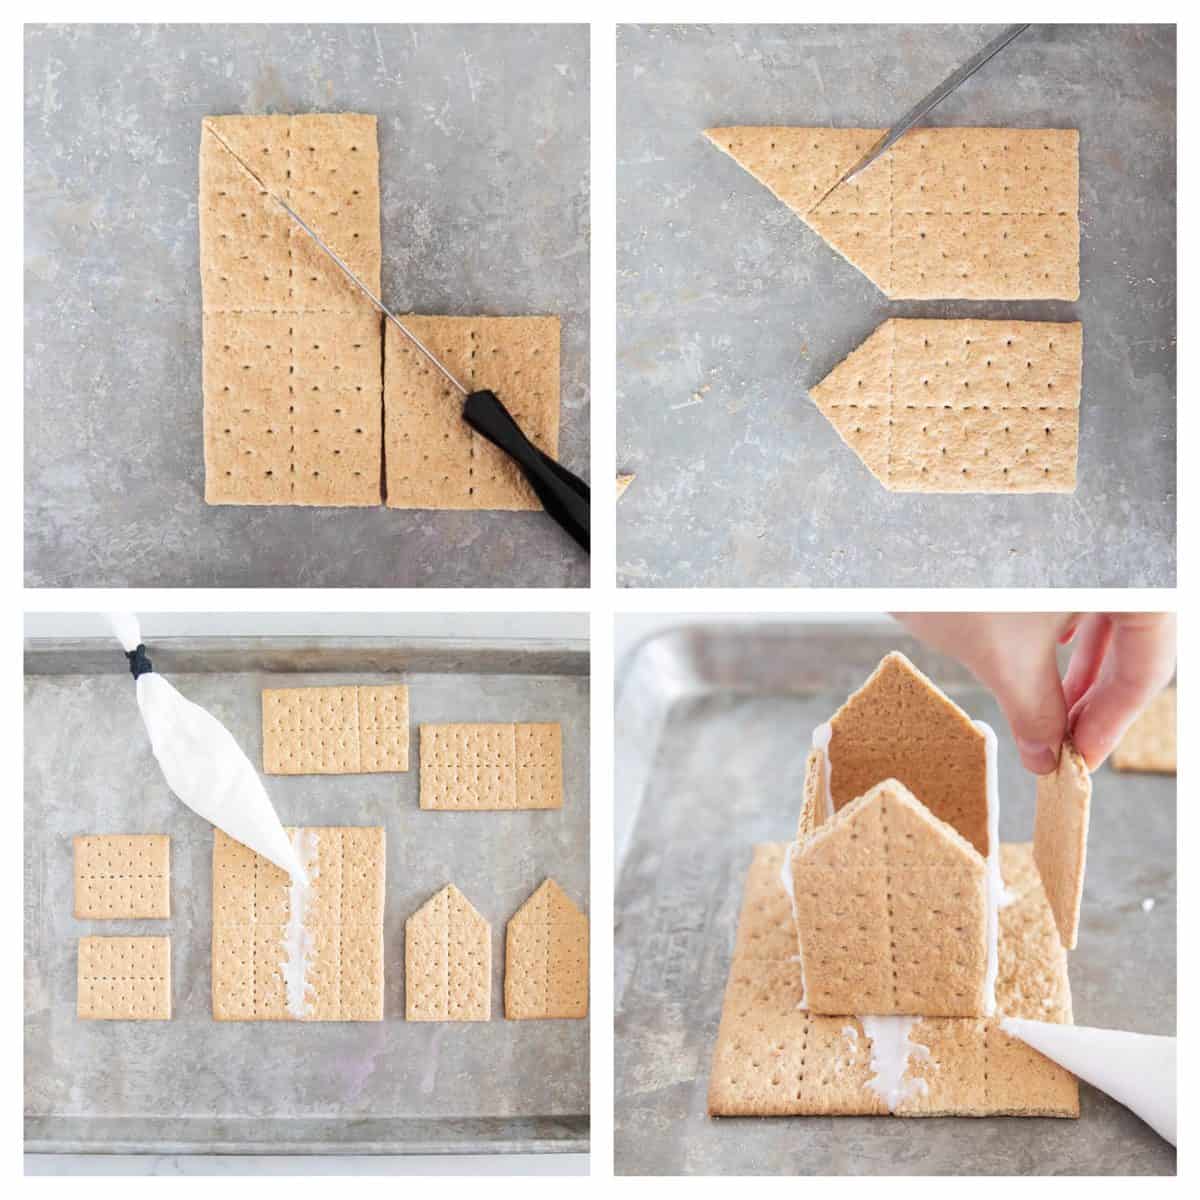 Showing how to make a Halloween gingerbread house with graham crackers.